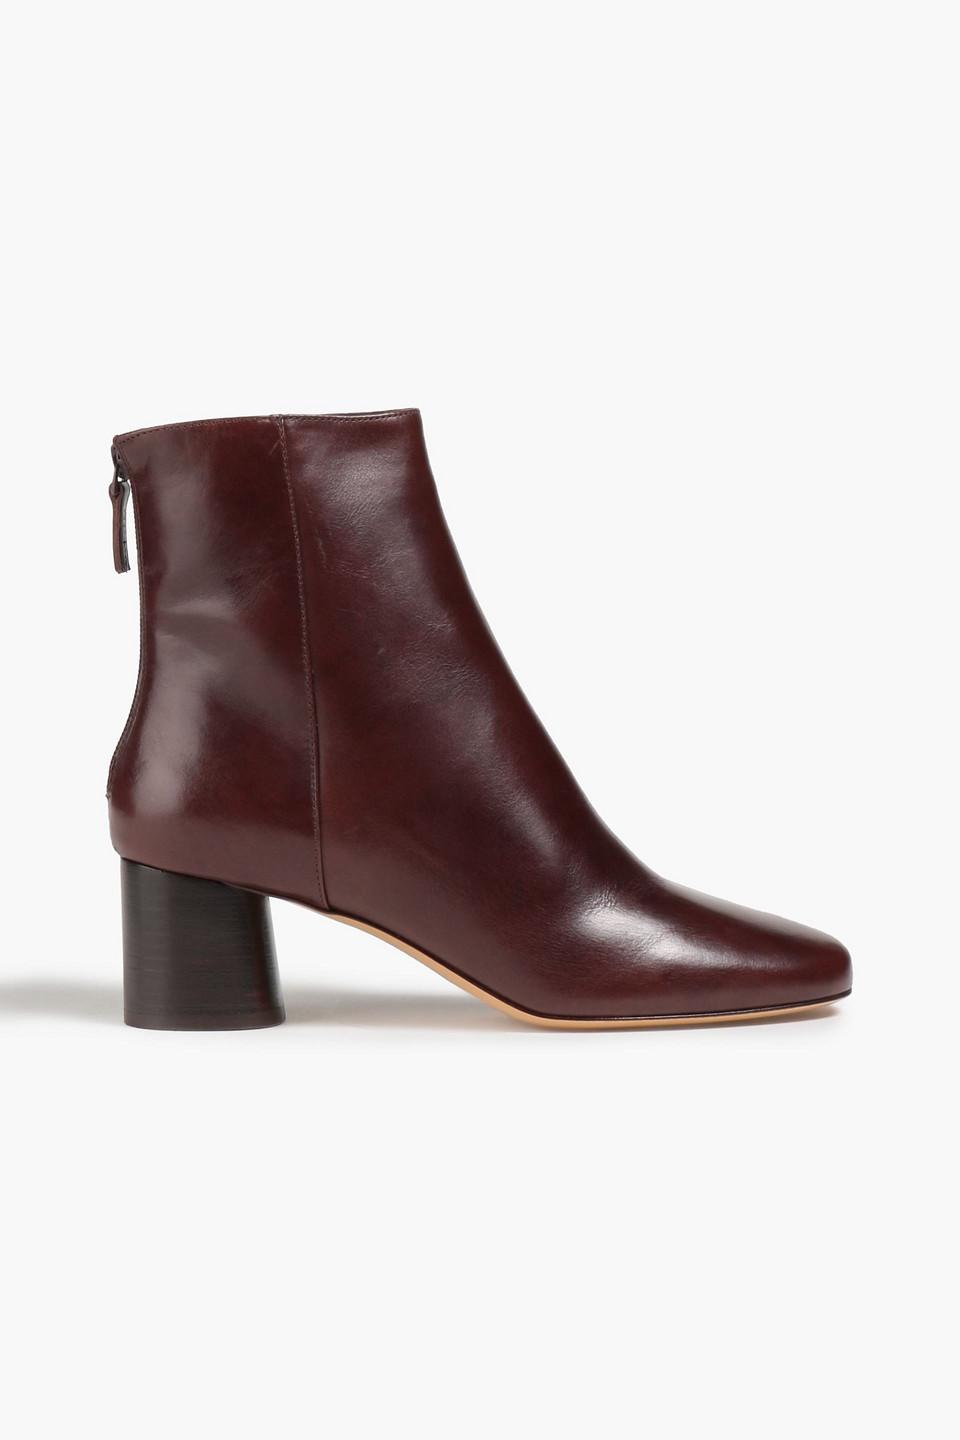 Sandro Camilla Leather Ankle Boots in Brown | Lyst UK